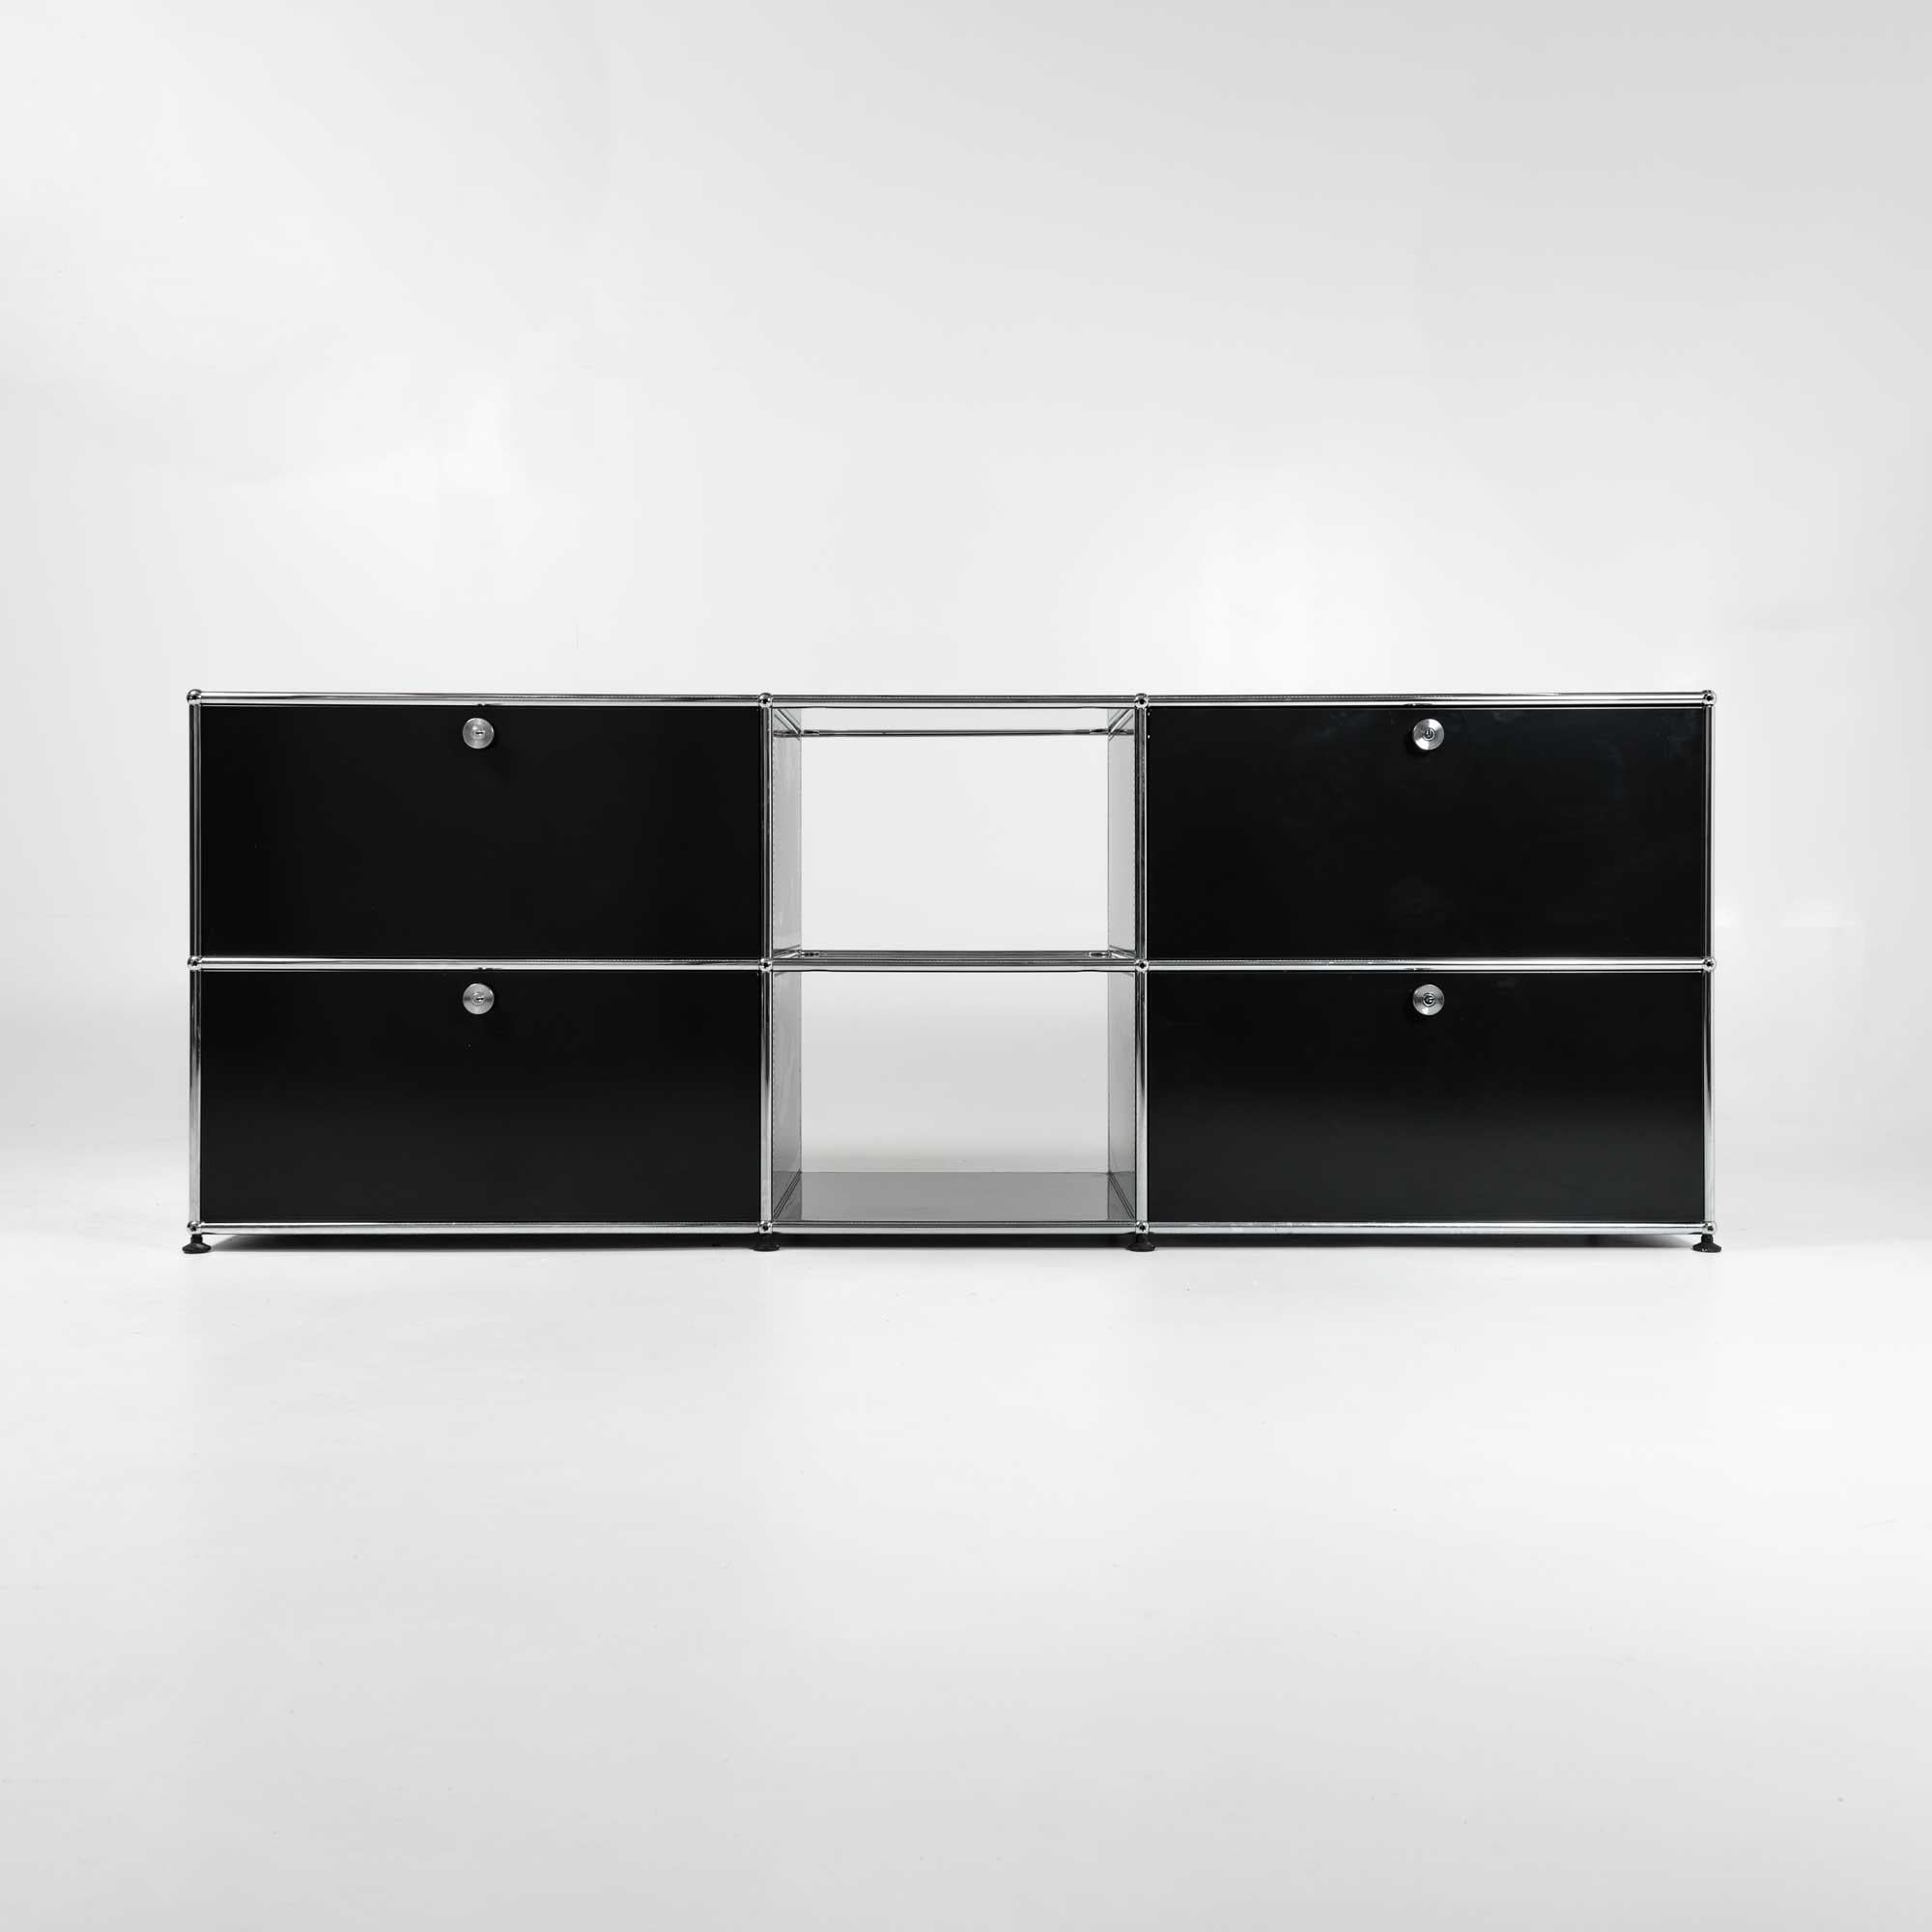 This is a modular USM Haller two tier three column cabinet/credenza in Graphite Black in Switzerland, in overall good condition, some wears and scratches on the surface. In overall good condition, ready to be used. This unit has 4 drawers with soft